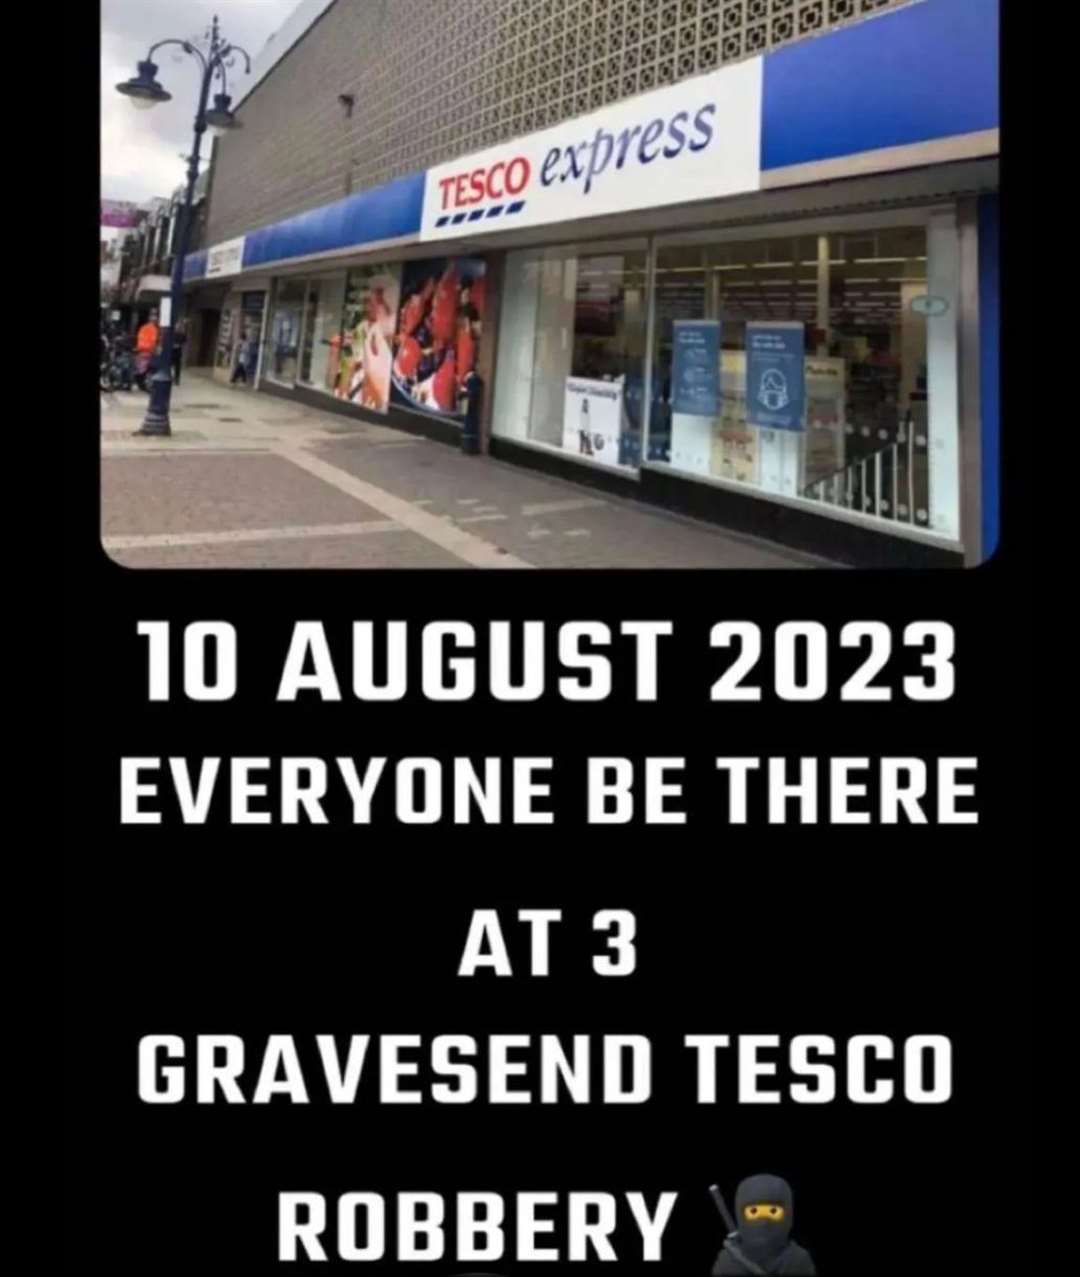 An invitation to a planned robbery at Tesco in Gravesend has been sent on Snapchat